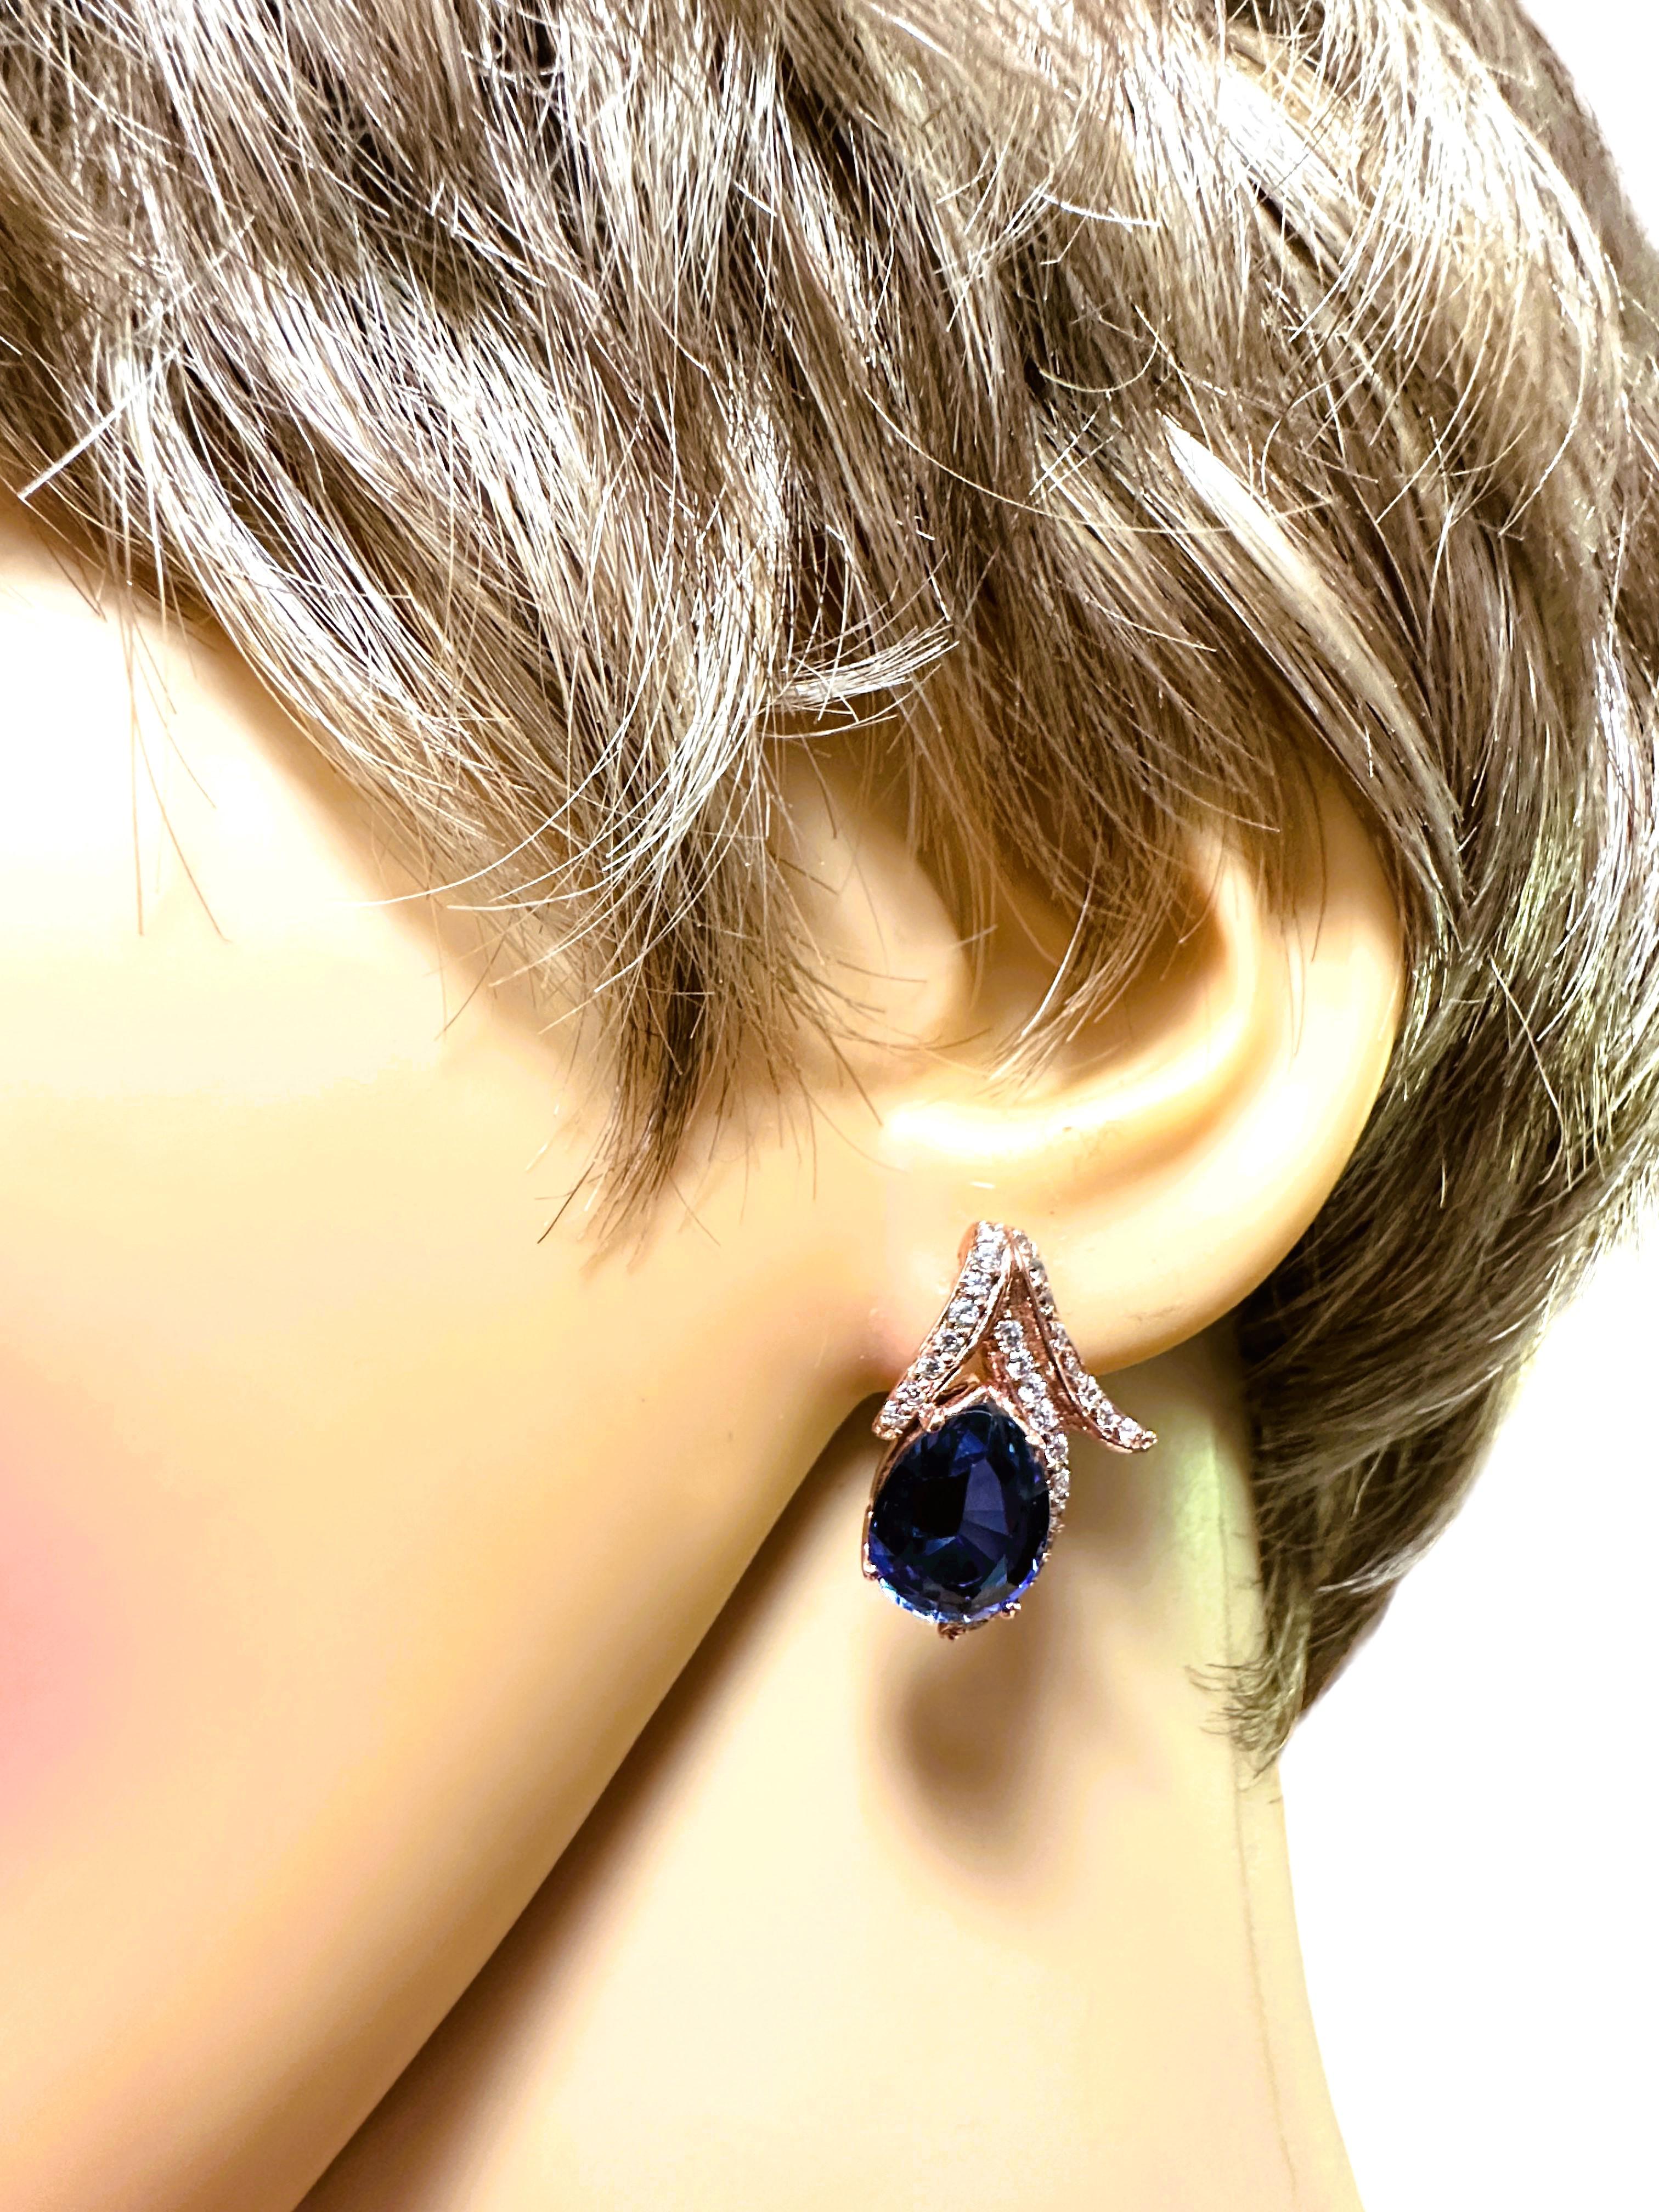 Art Deco New African IF 8.4ct Dark Blue Sapphire Post RGold Plated Sterling Earrings